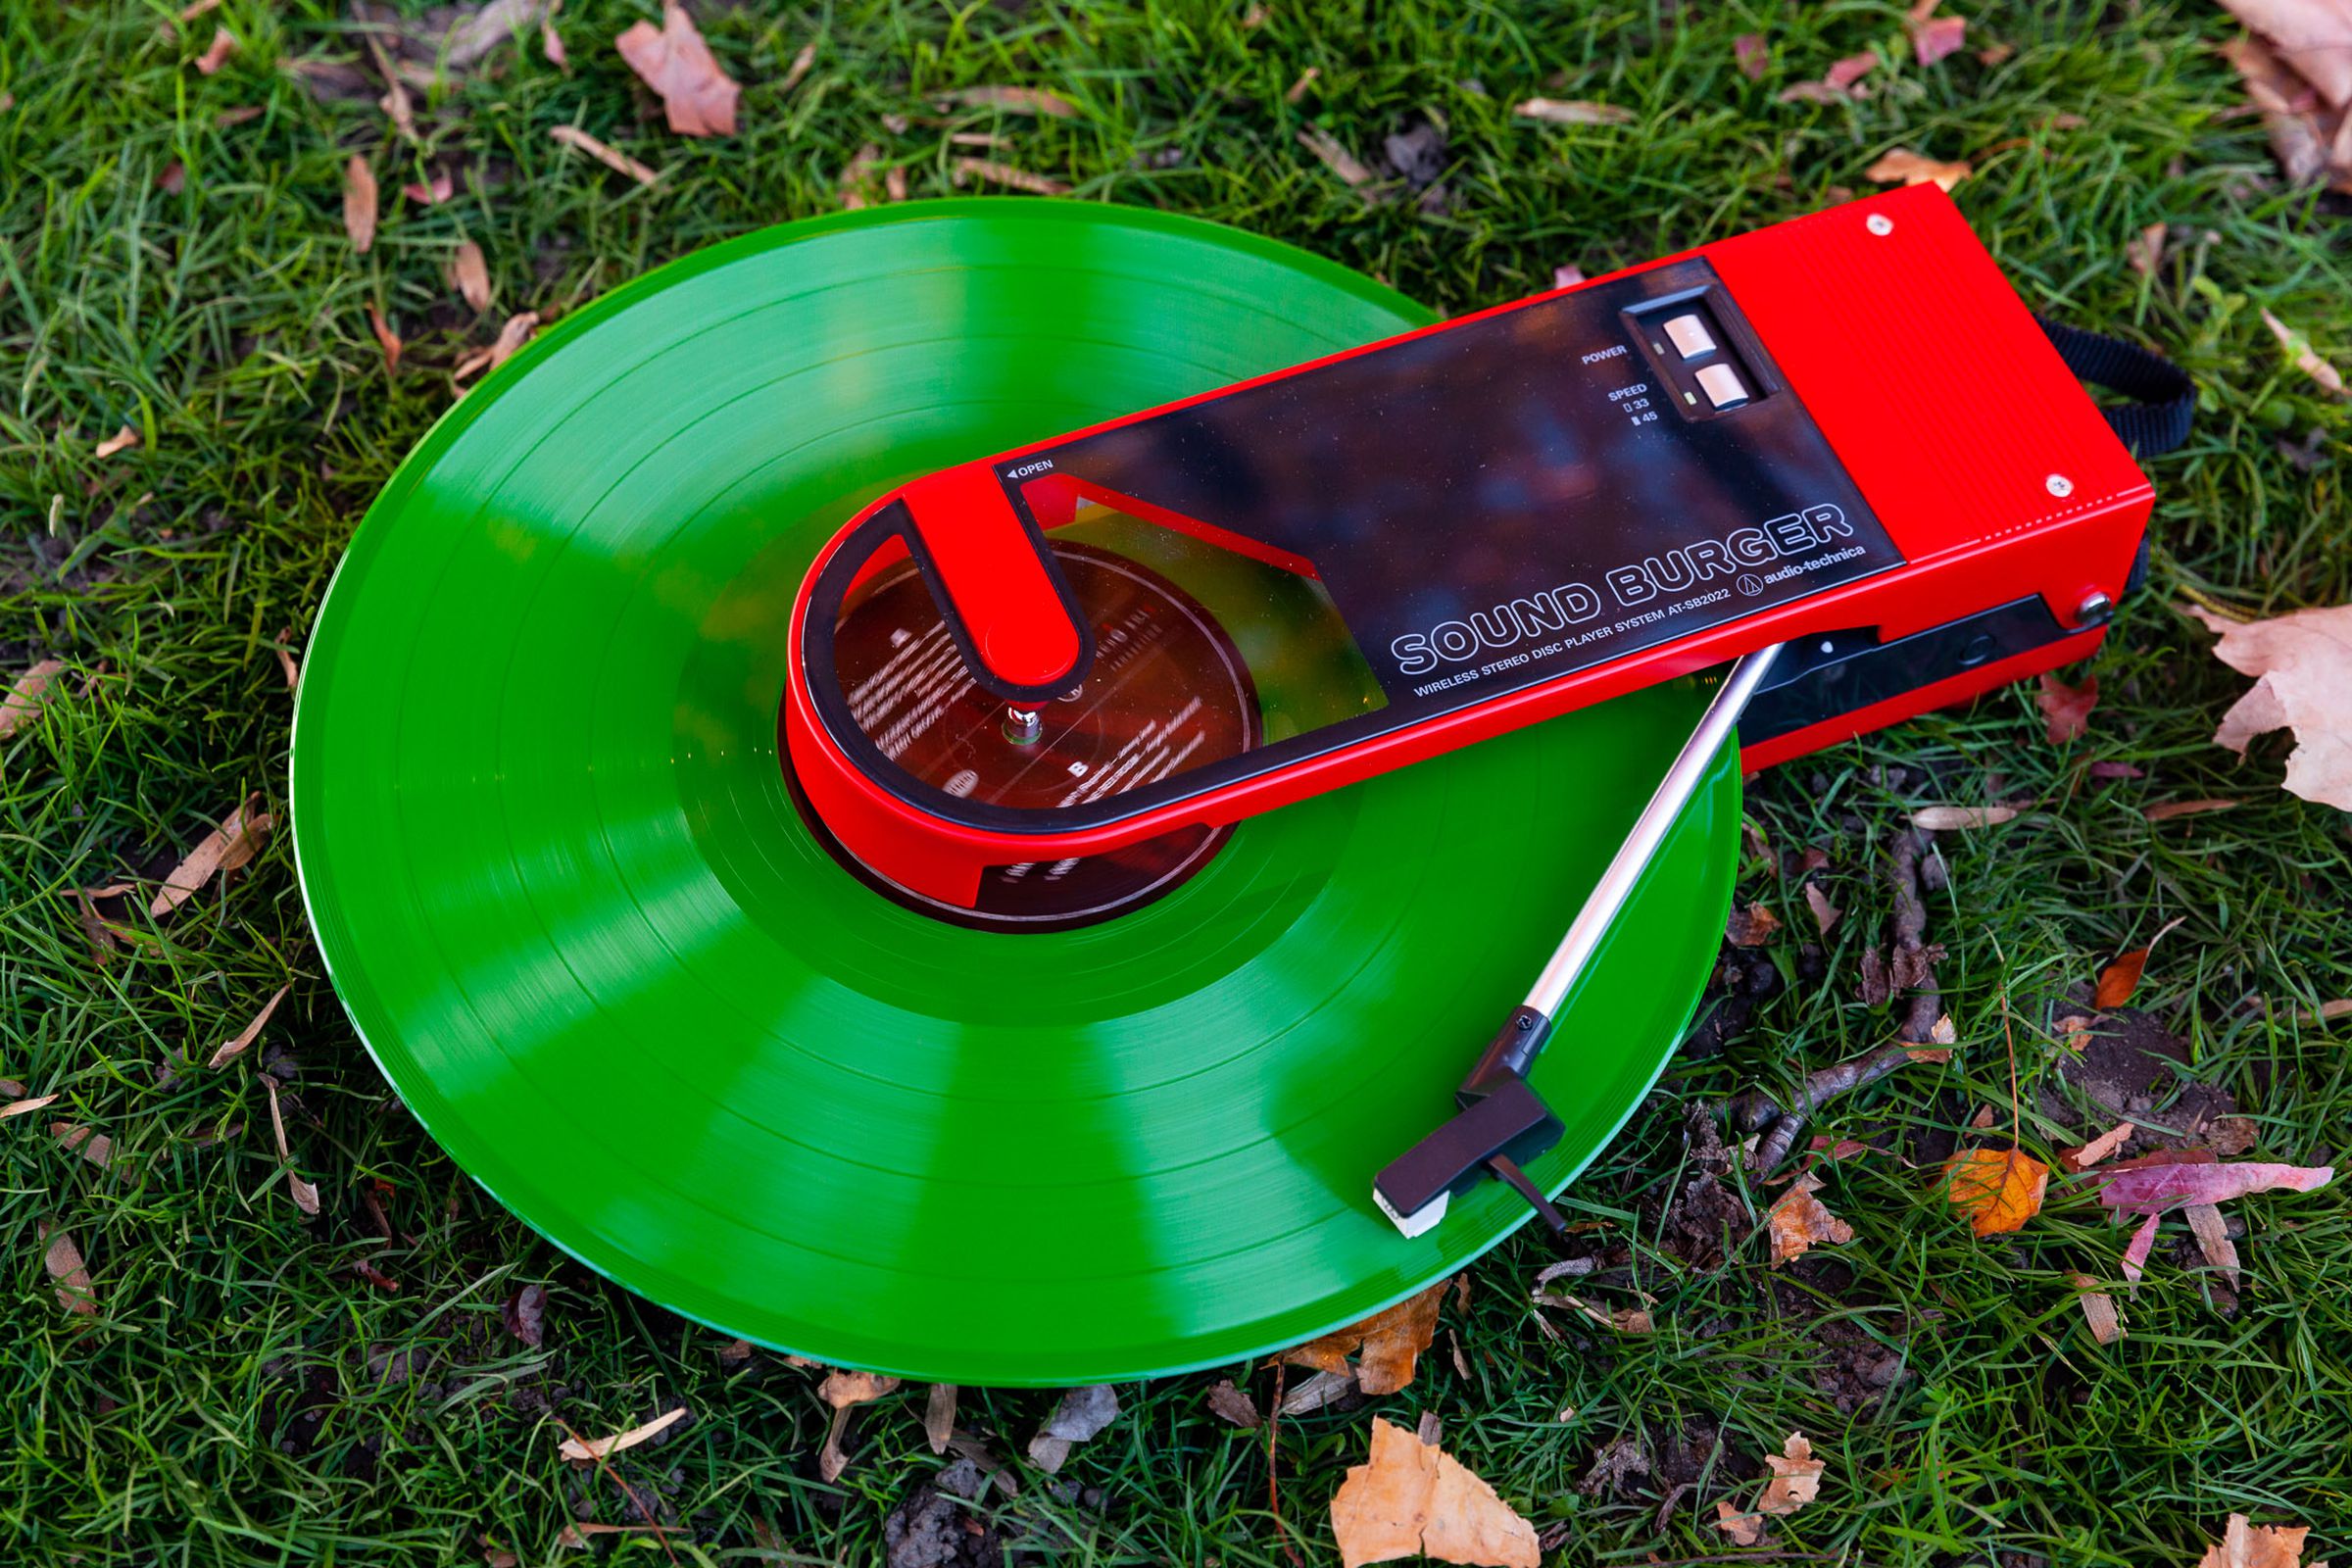 The Soundburger lays in the grass playing a green record